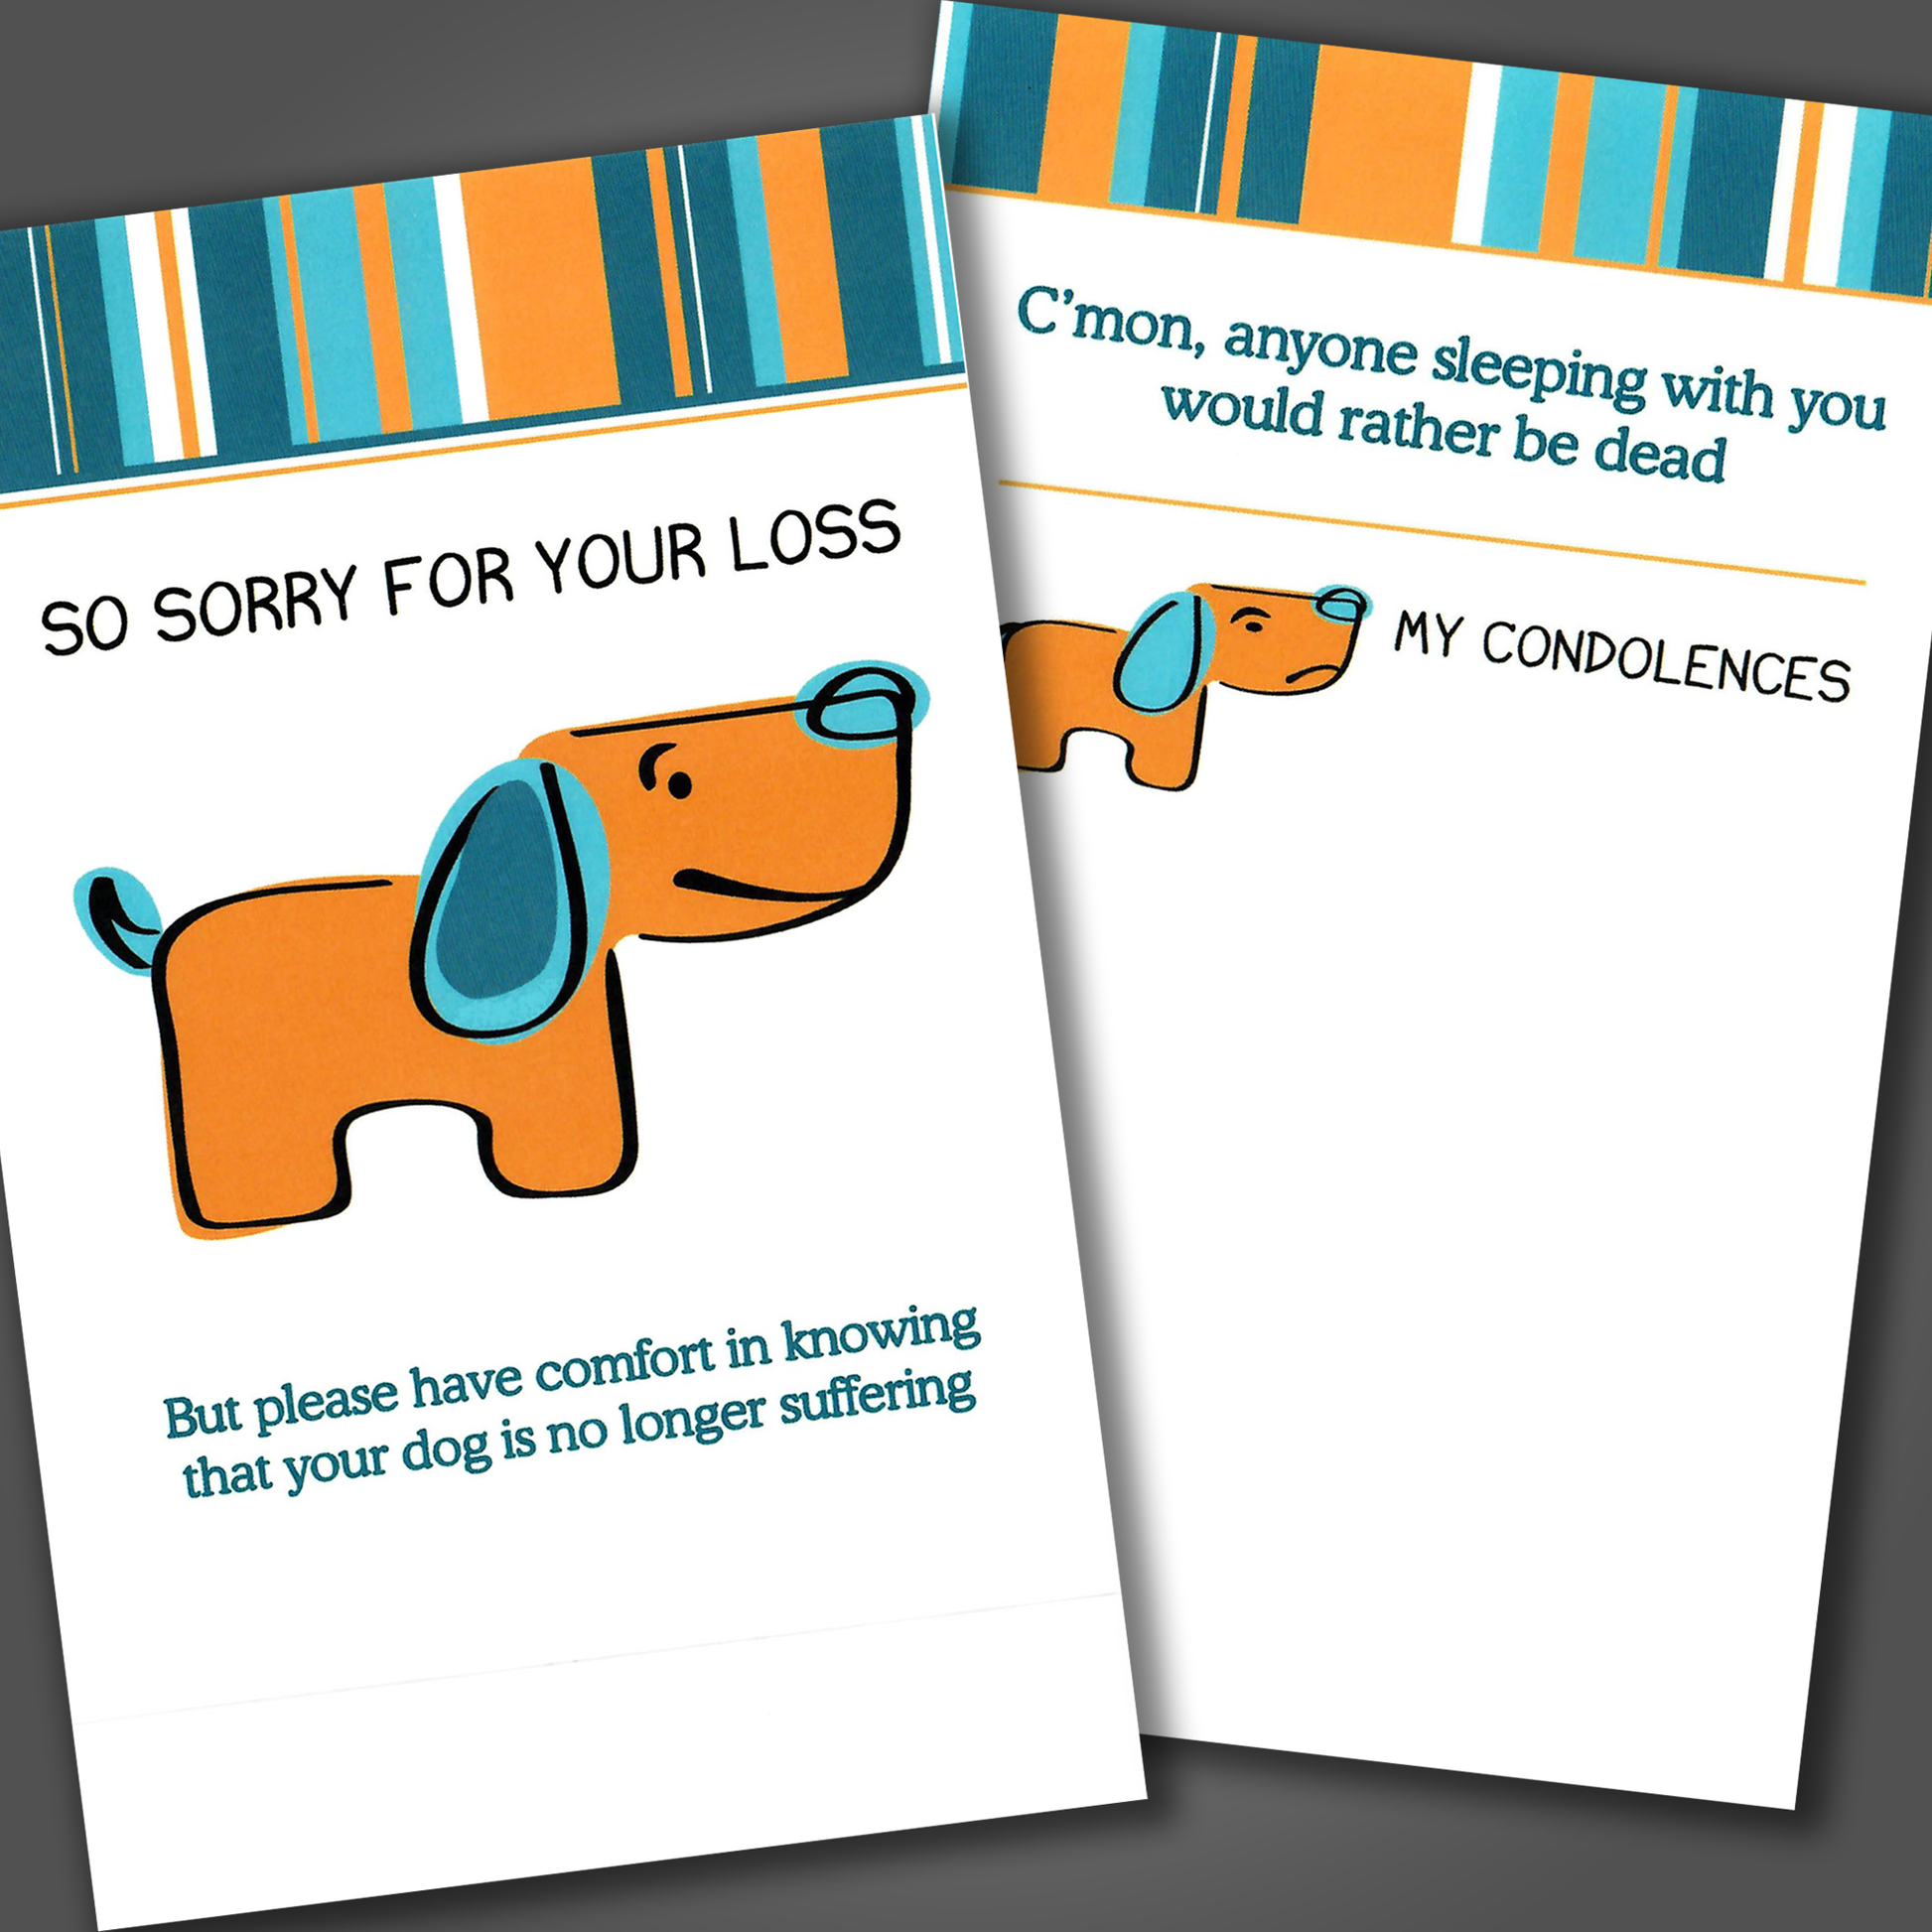 Sympathy card for the death of a dog with dogs and dog toys drawn on the front of the card. Inside the card is a funny joke that tries to make the person laugh. THIS IS A CLEARANCE CARD